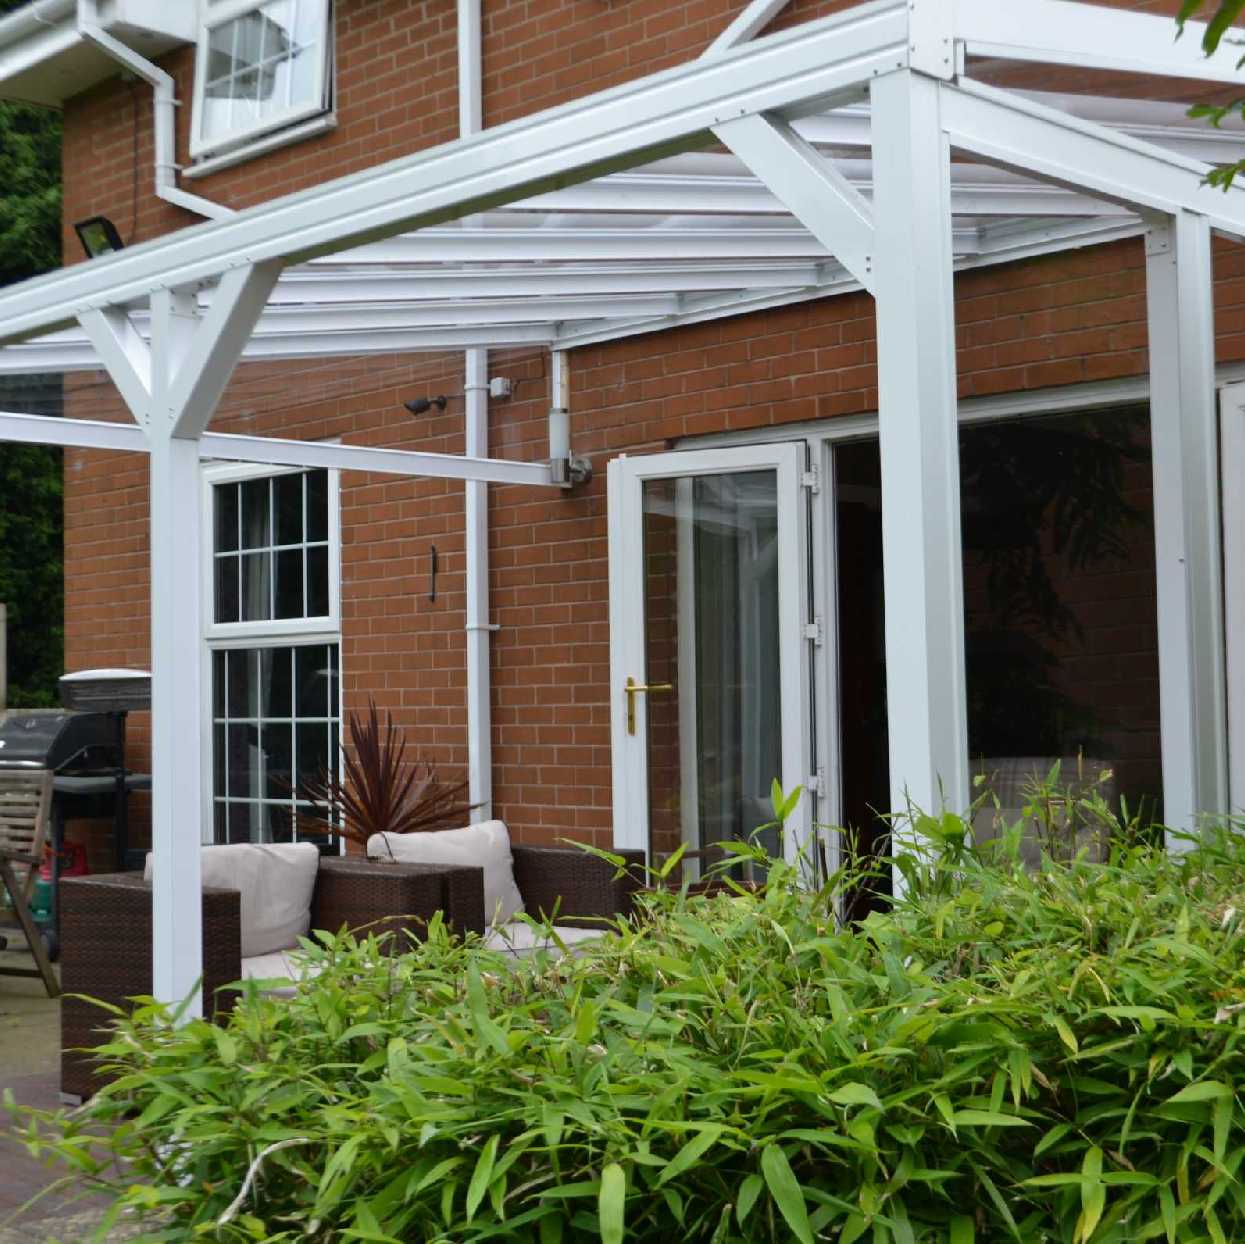 Omega Smart Lean-To Canopy, White with 6mm Glass Clear Plate Polycarbonate Glazing - 9.1m (W) x 2.0m (P), (5) Supporting Posts from Omega Build